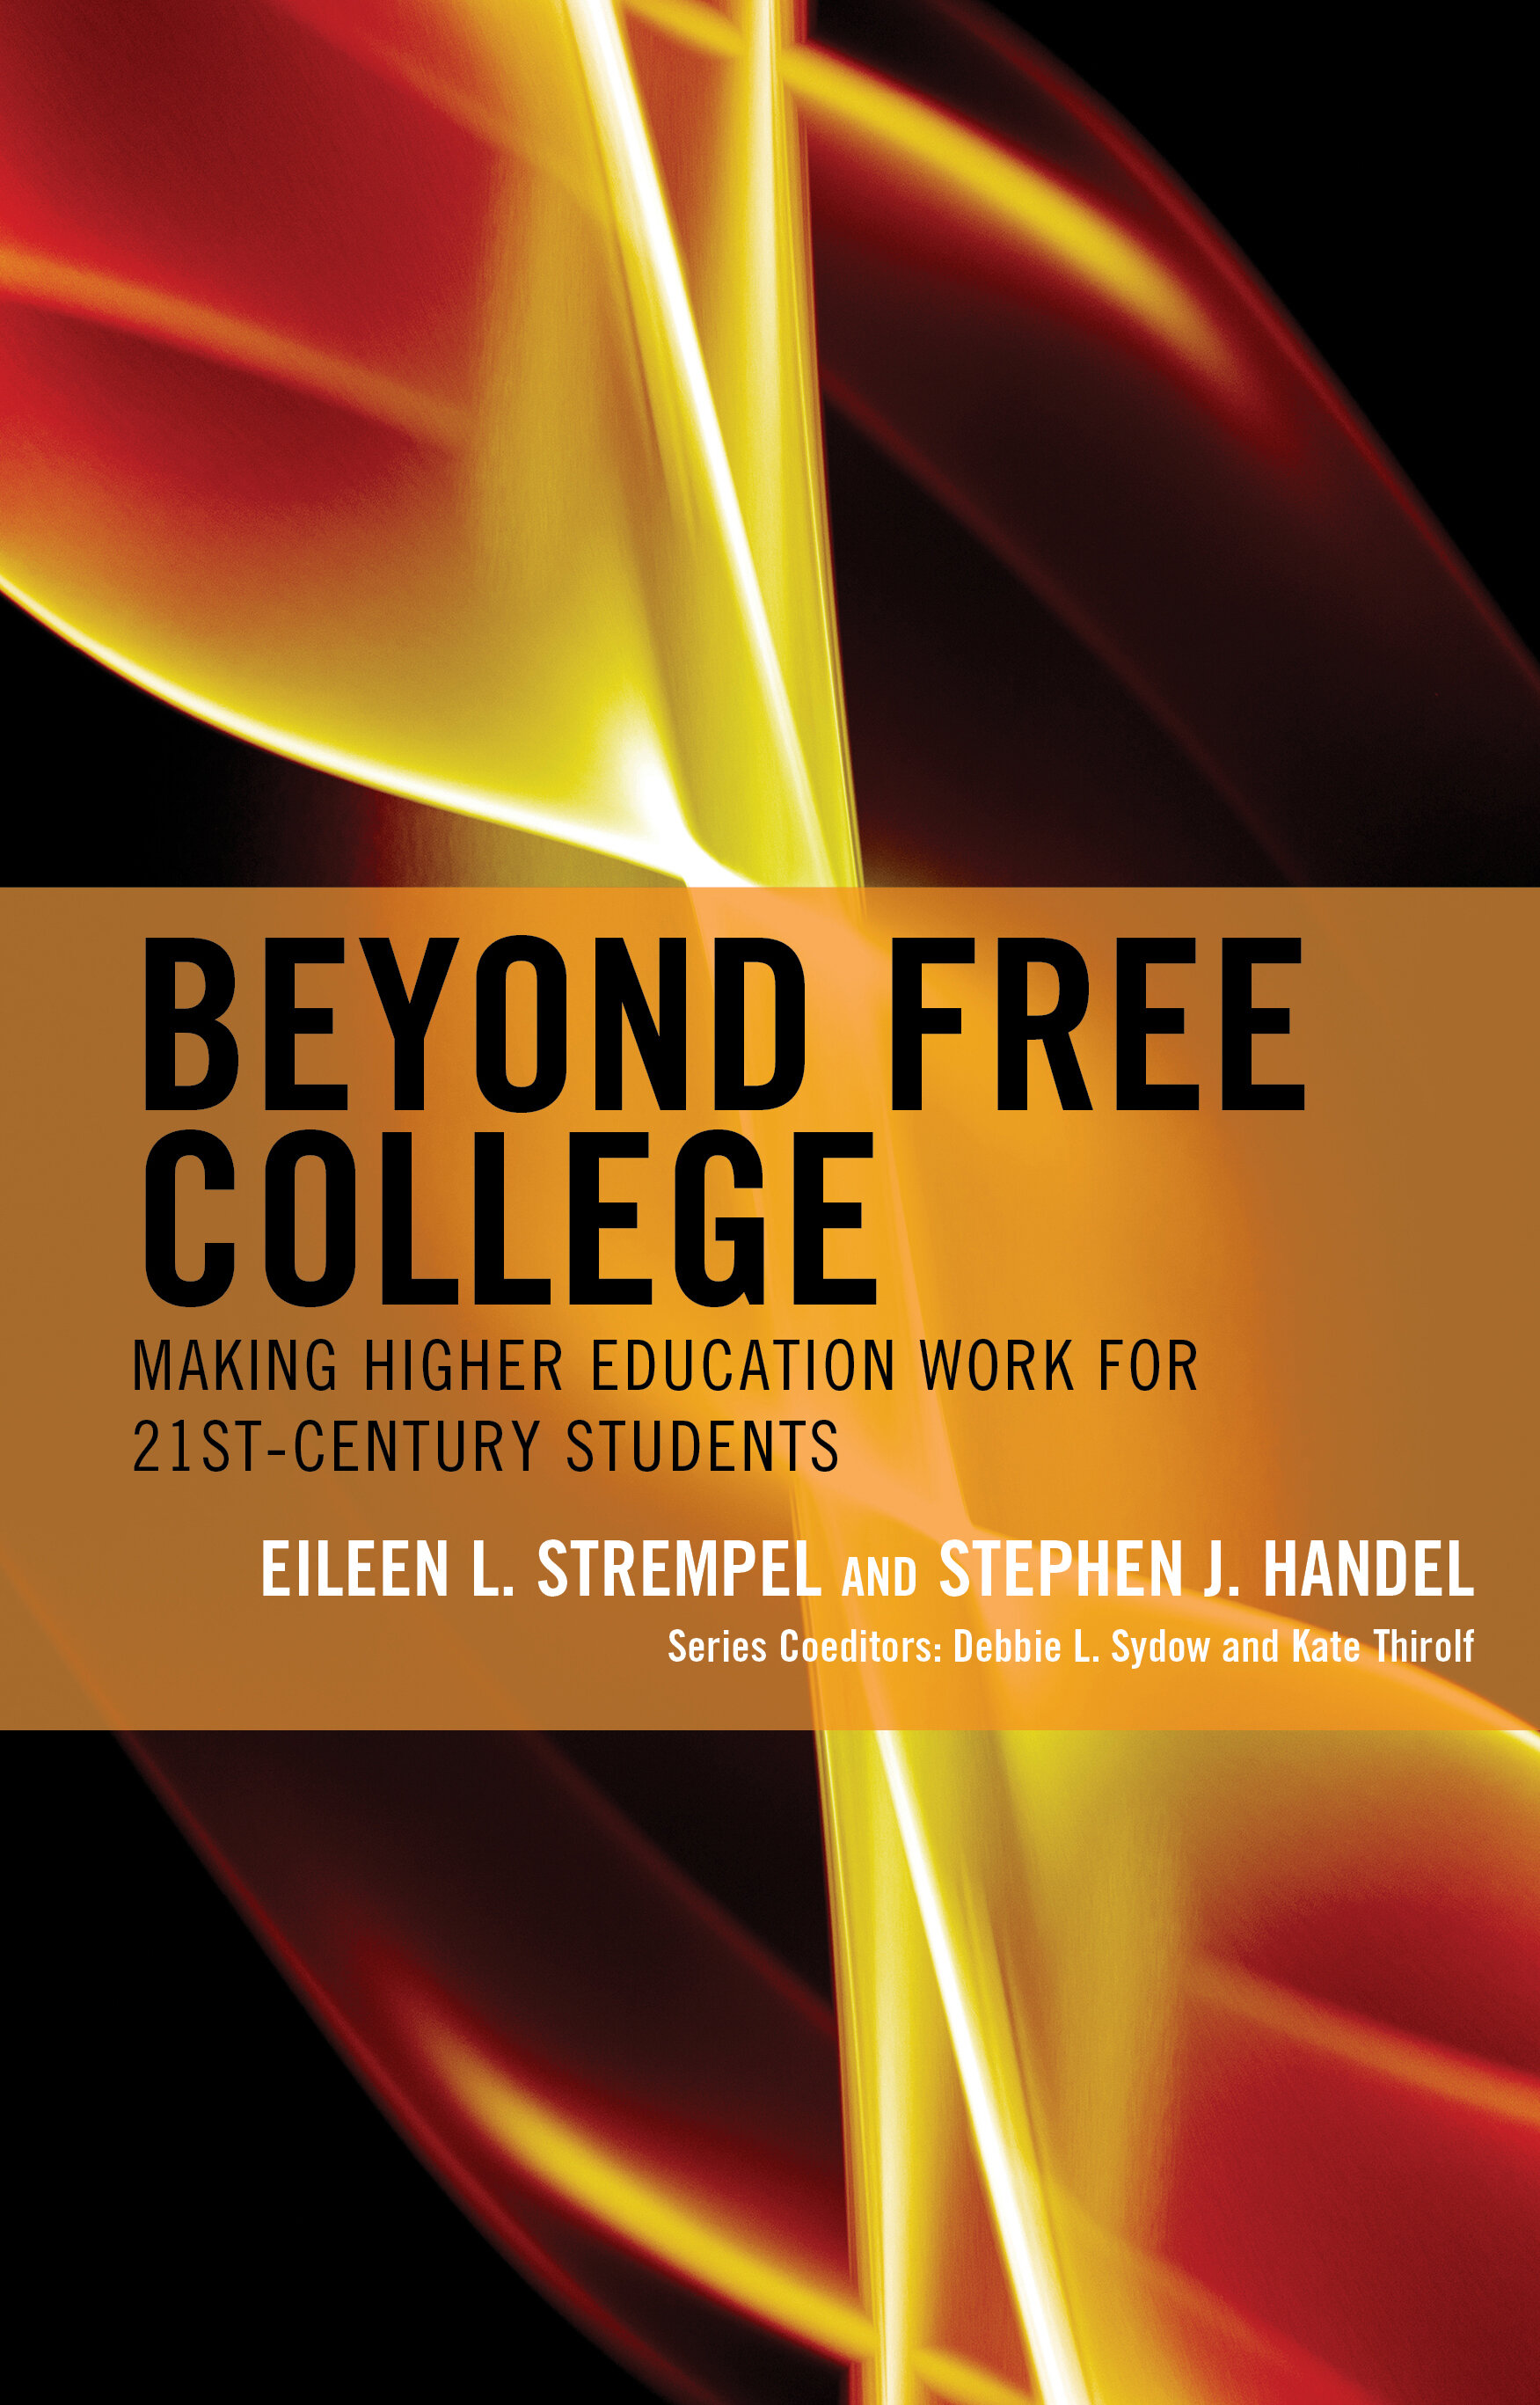 Beyond Free College - Book Cover.jpg